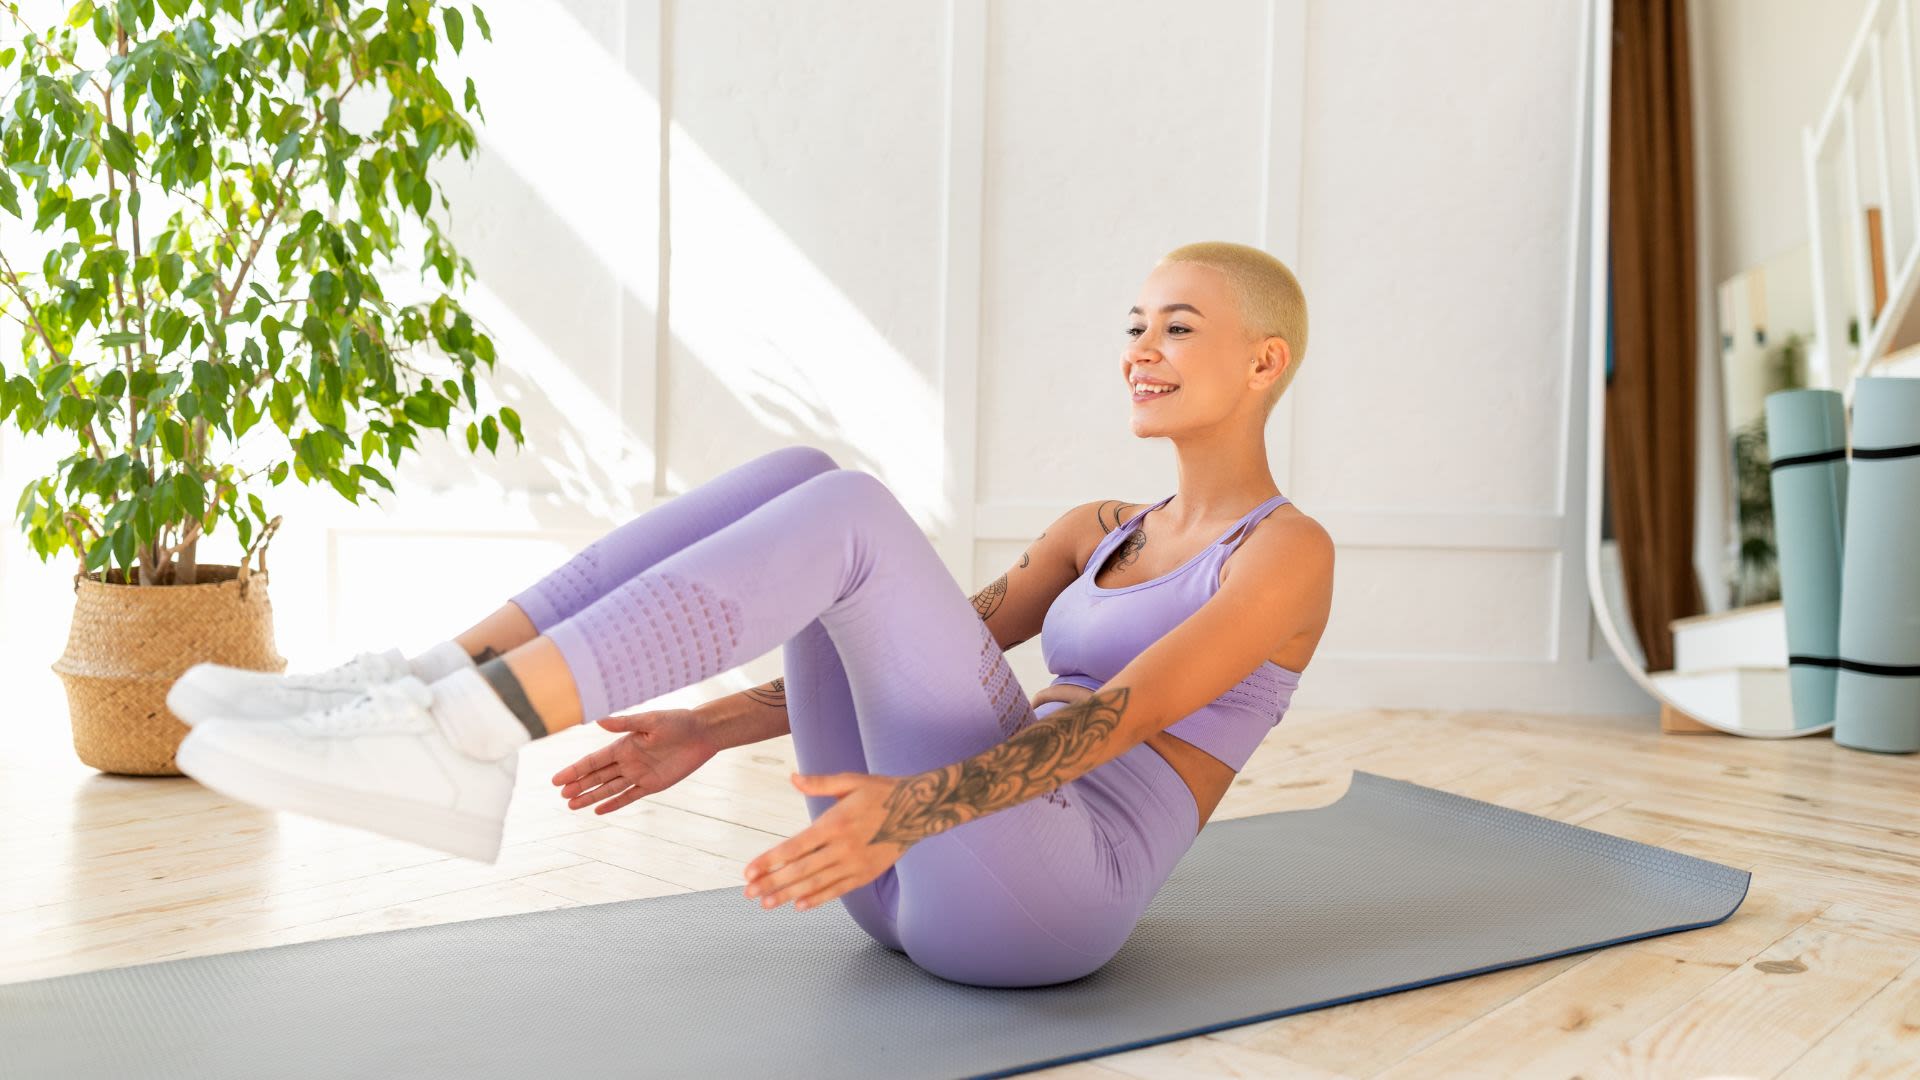 Improve your posture and strengthen your entire body with this 8-move Pilates workout